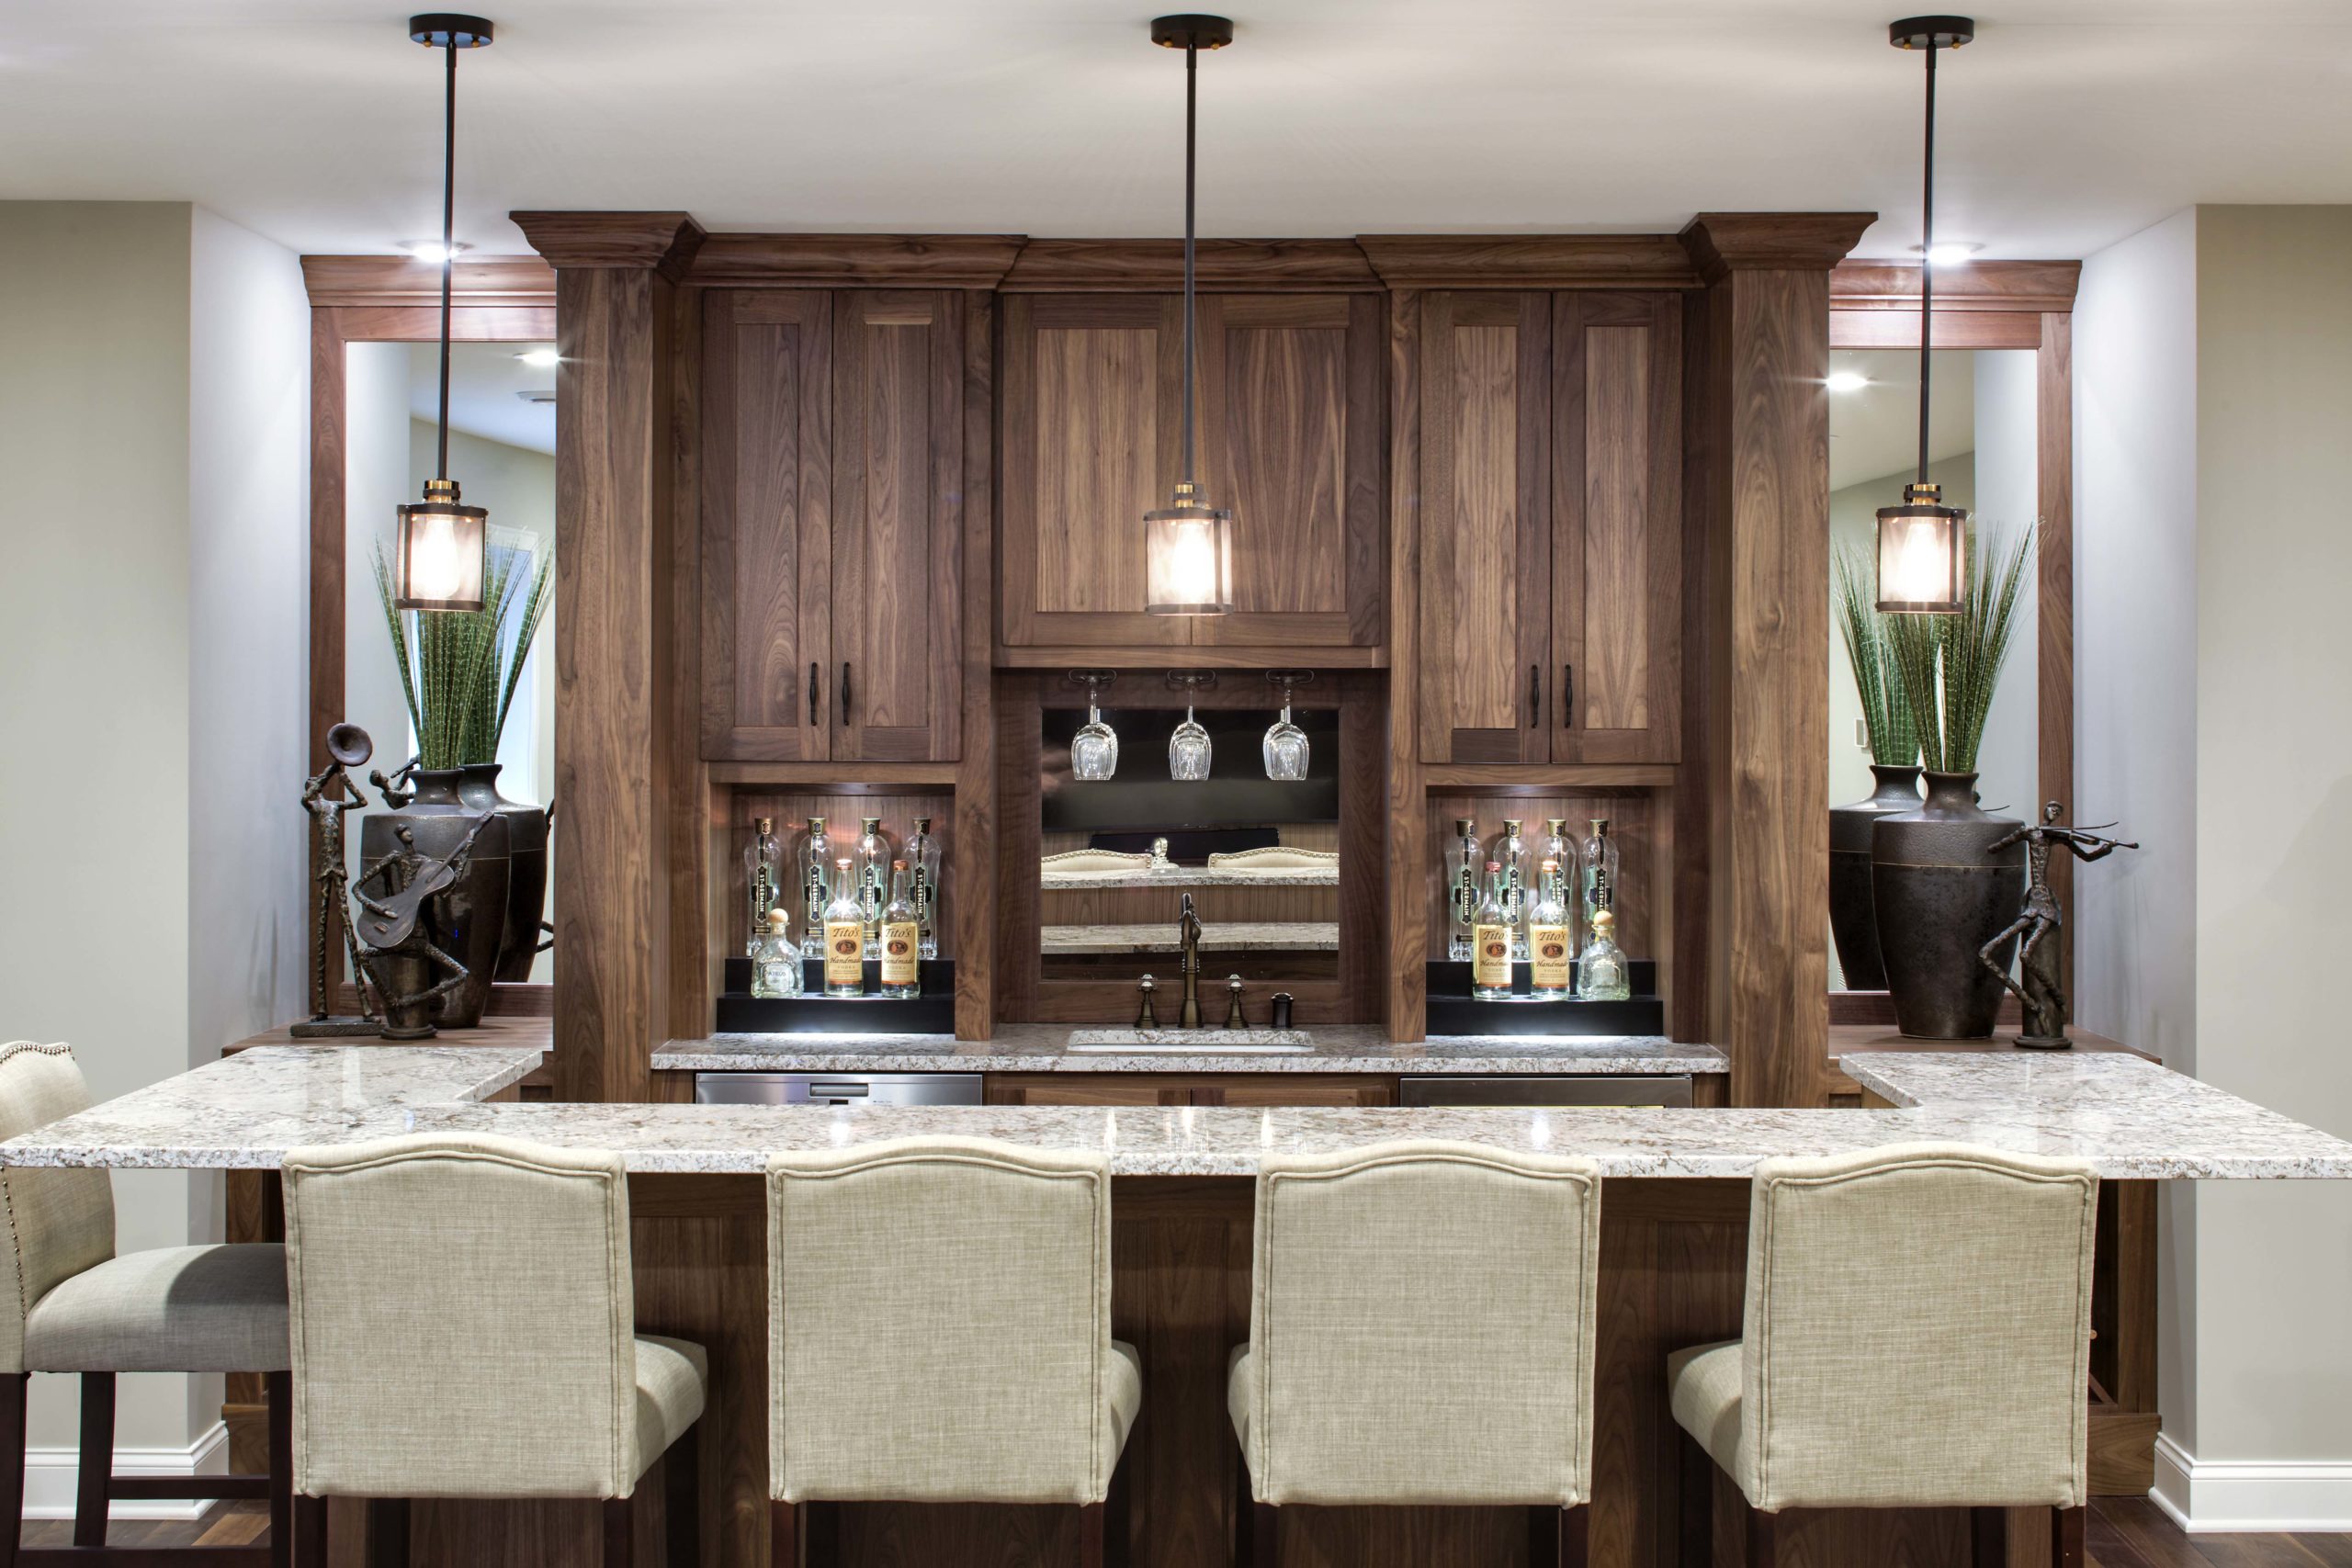 A modern kitchen with a bar and stools.